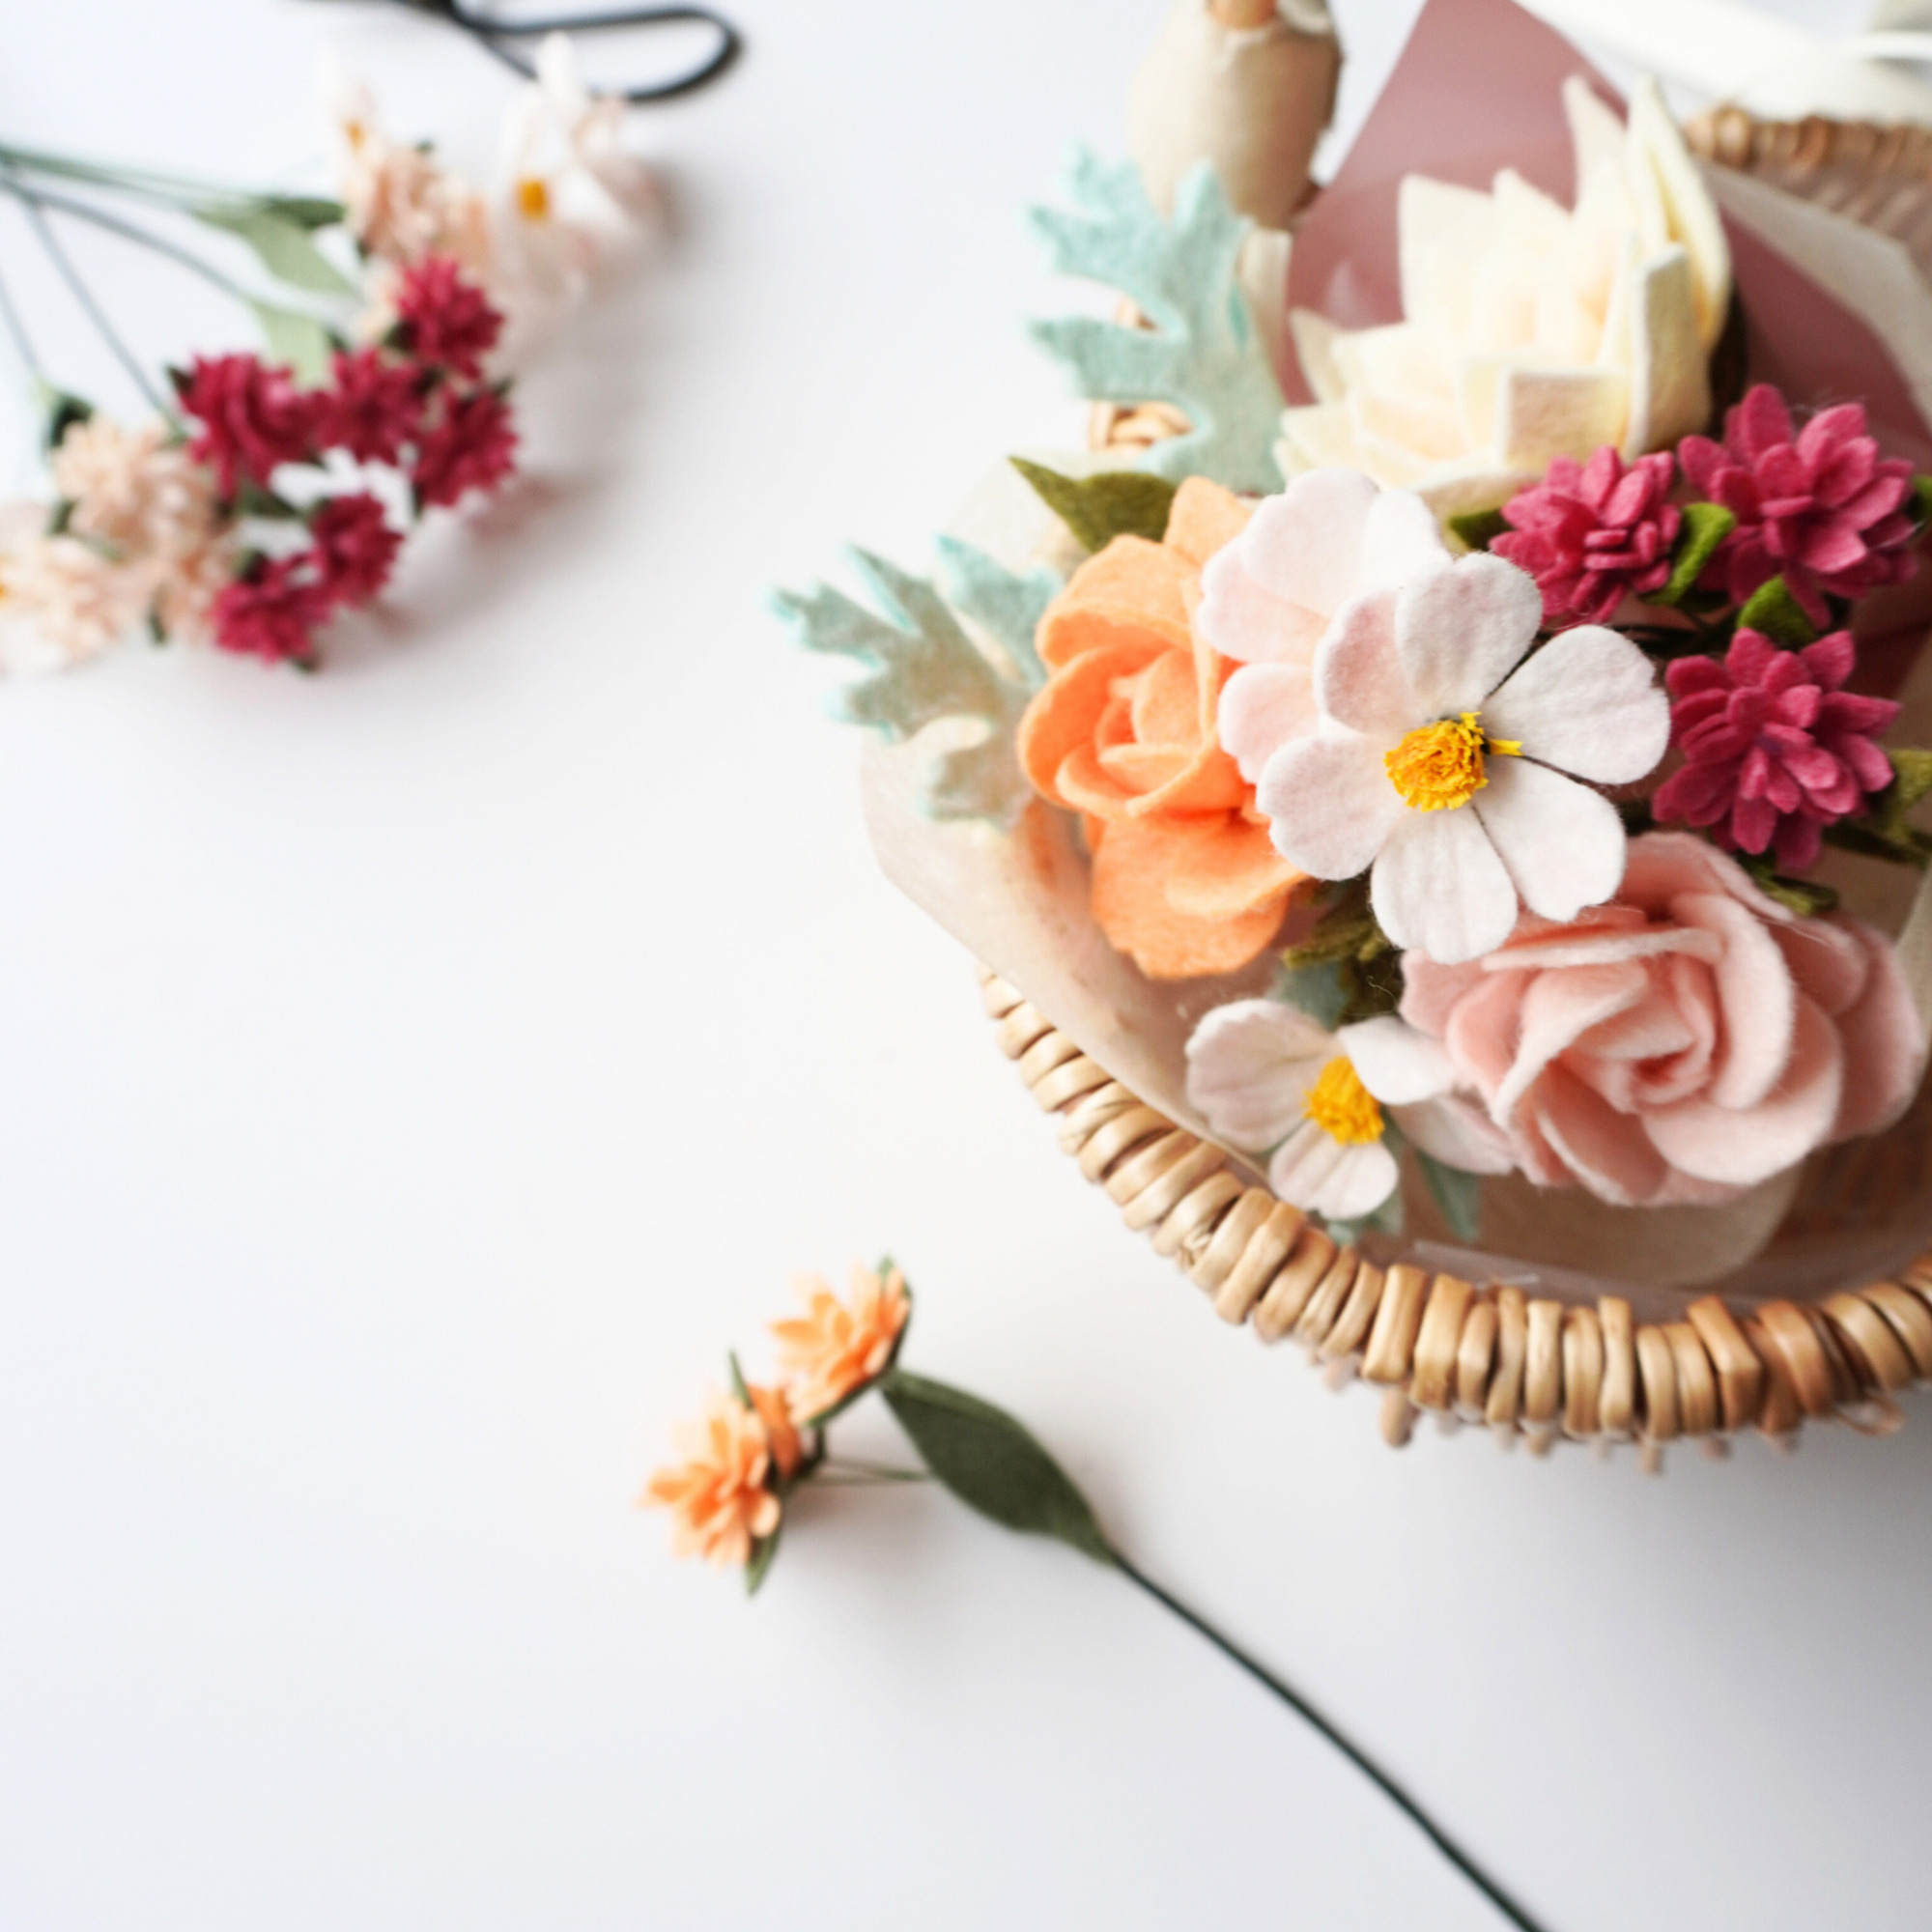 Felt mini bouquet with Personalised wooden tag - The Tsubaki